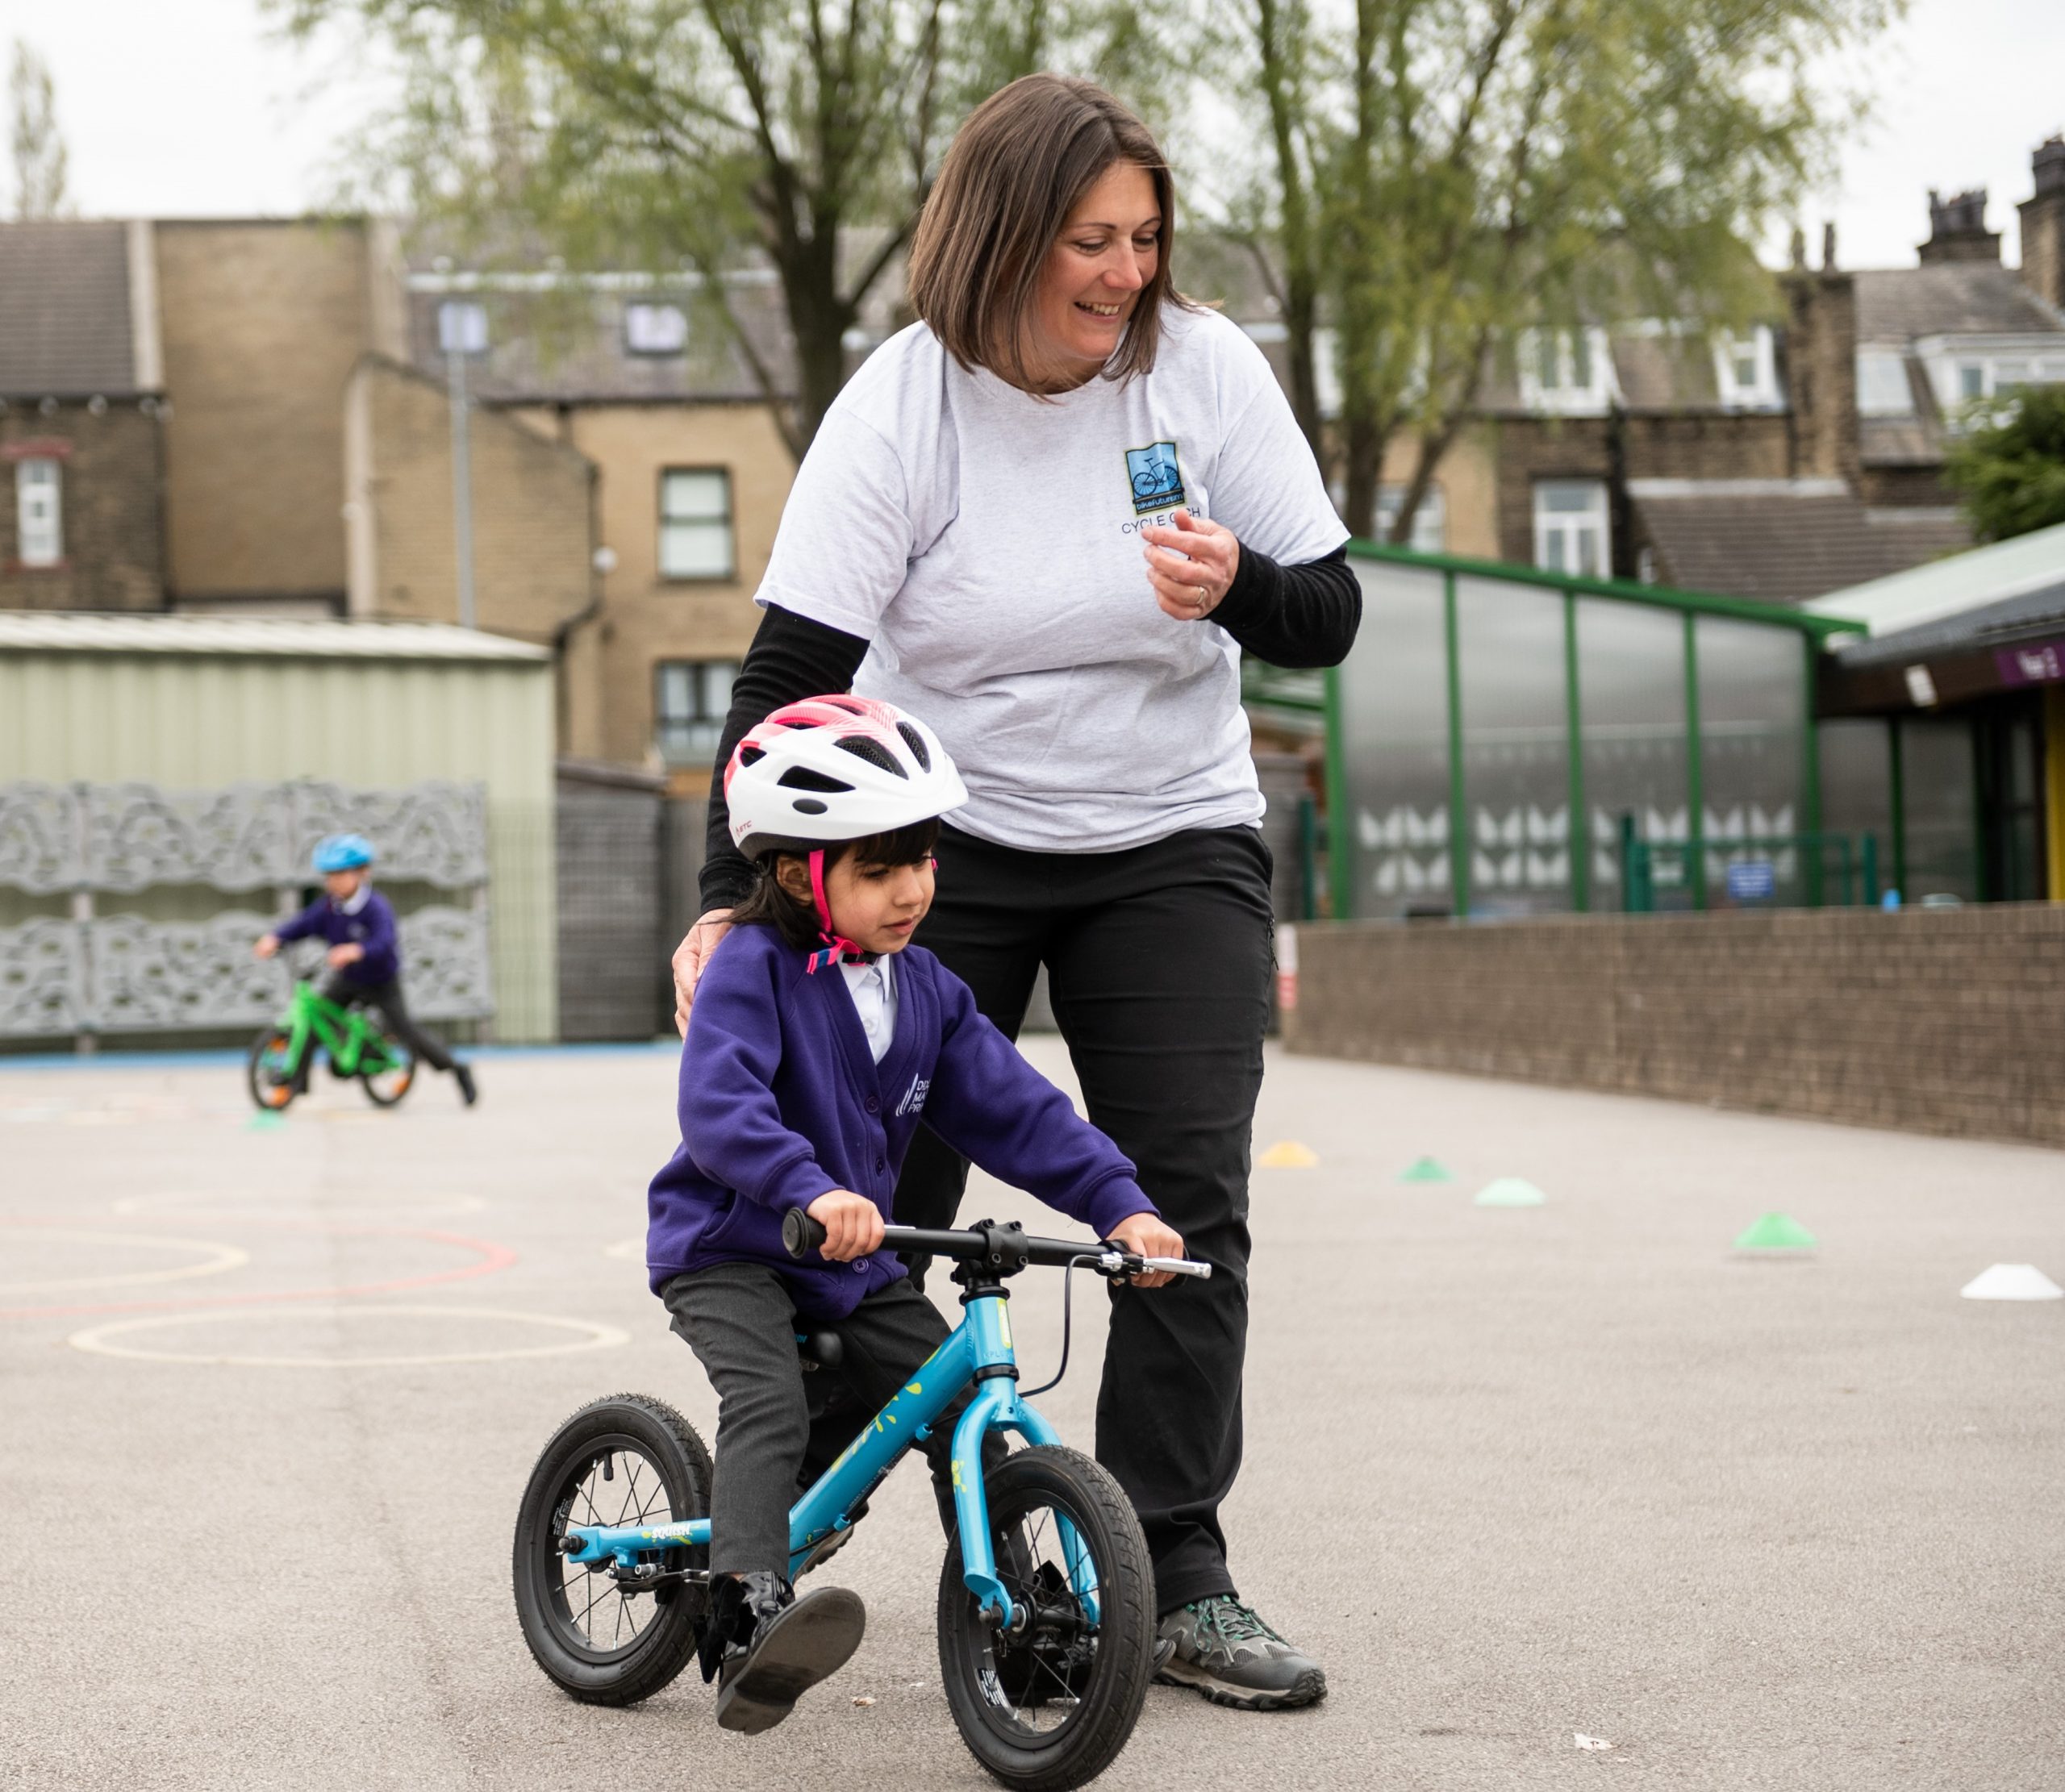 A young girl in a purple school cardigan is on a balance bike whilst a woman in a white t shirt guides her. They are both on a playground.